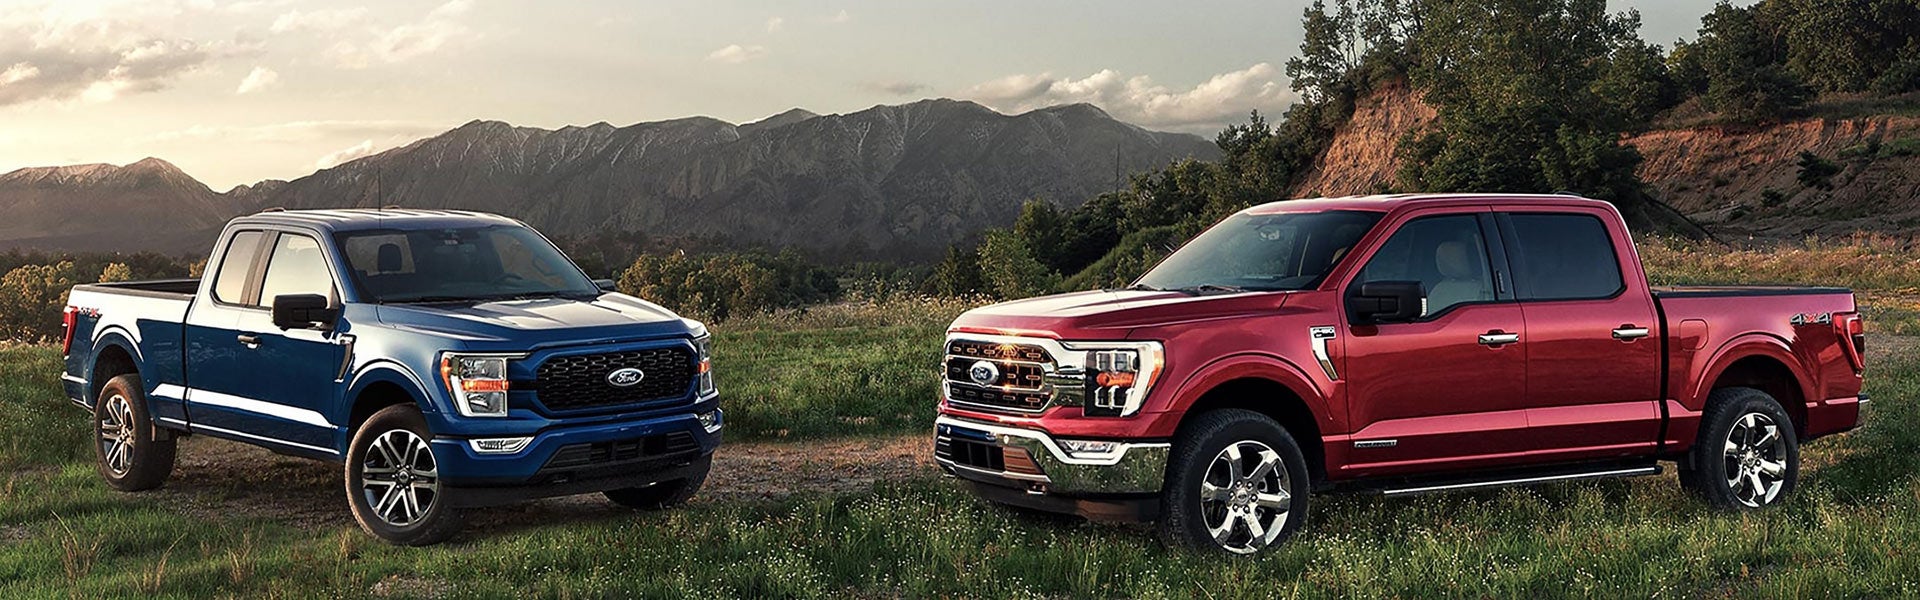 Two 2021 Ford F 1 50 parked in a field